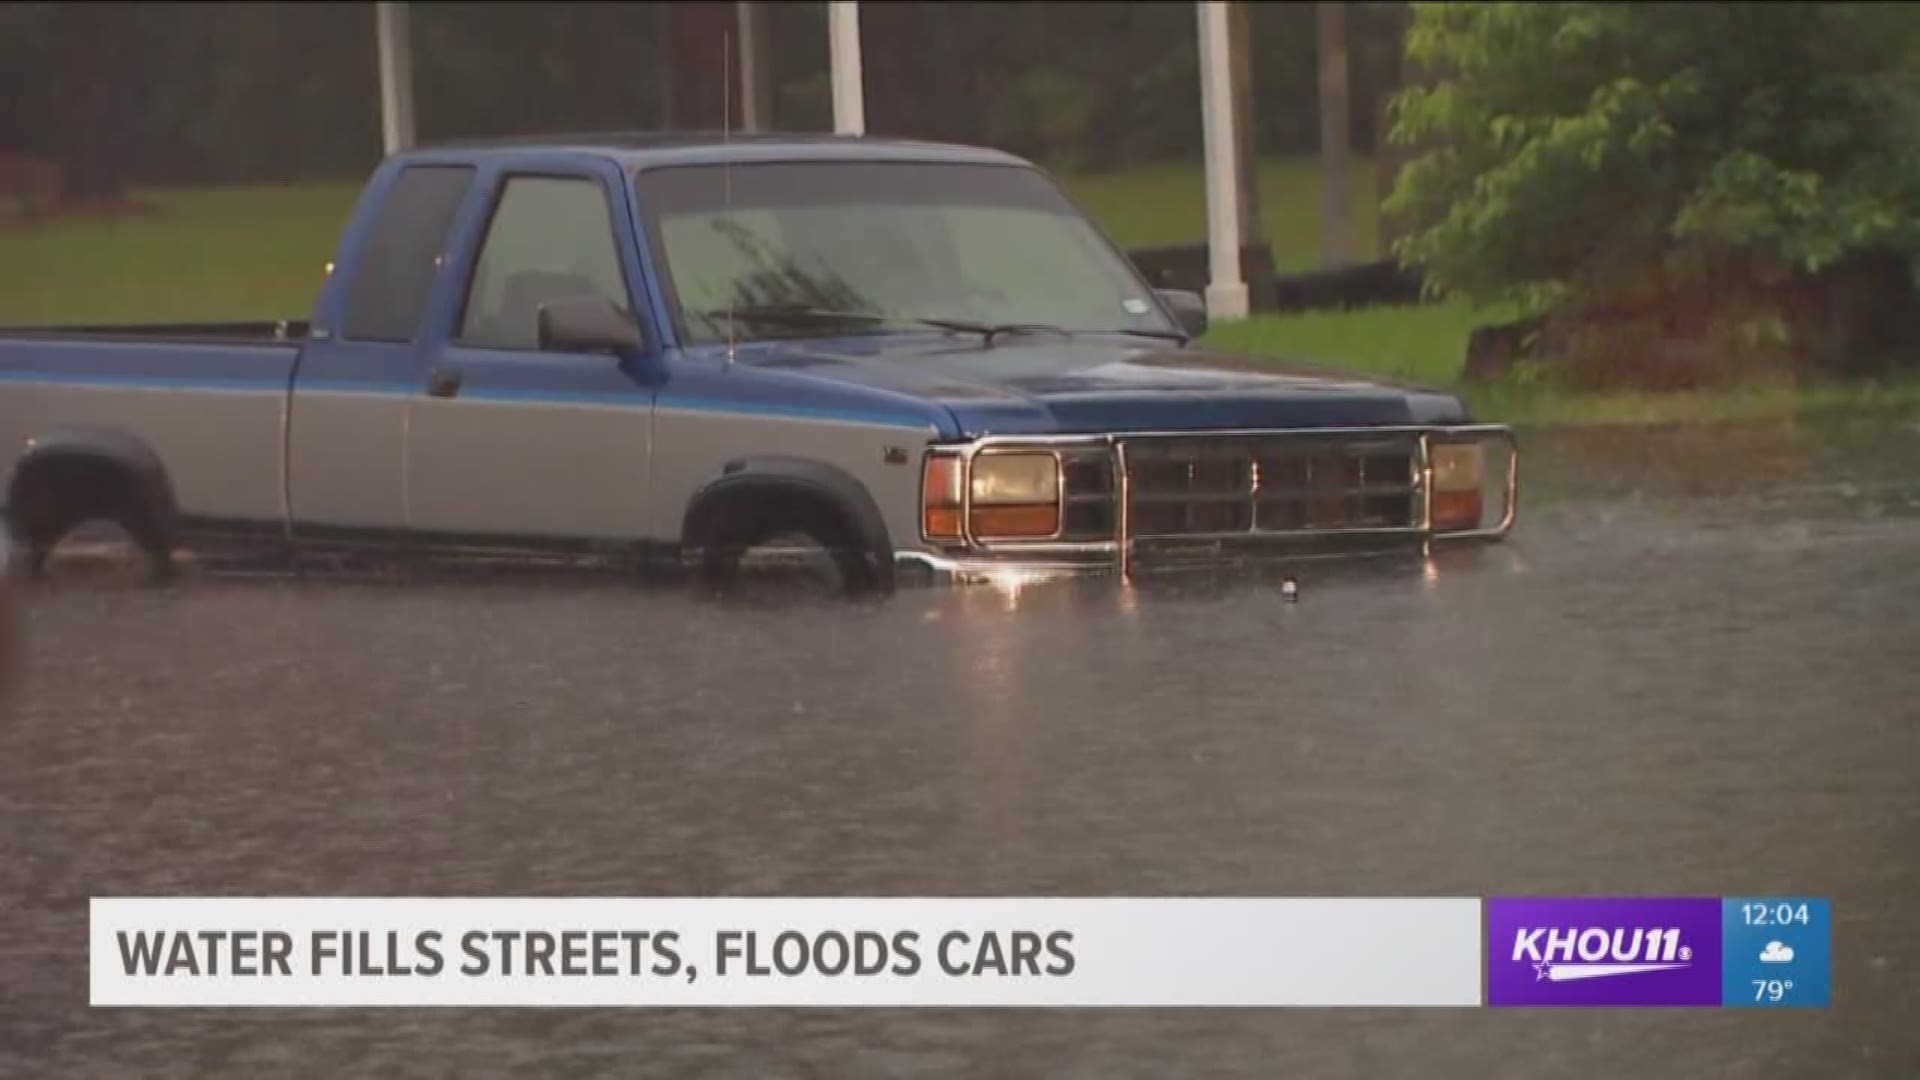 Most of the Houston area remains under a Flash Flood Watch Tuesday. Communities like La Marque and Dickinson were left with flooding after heavy rains early in the morning.